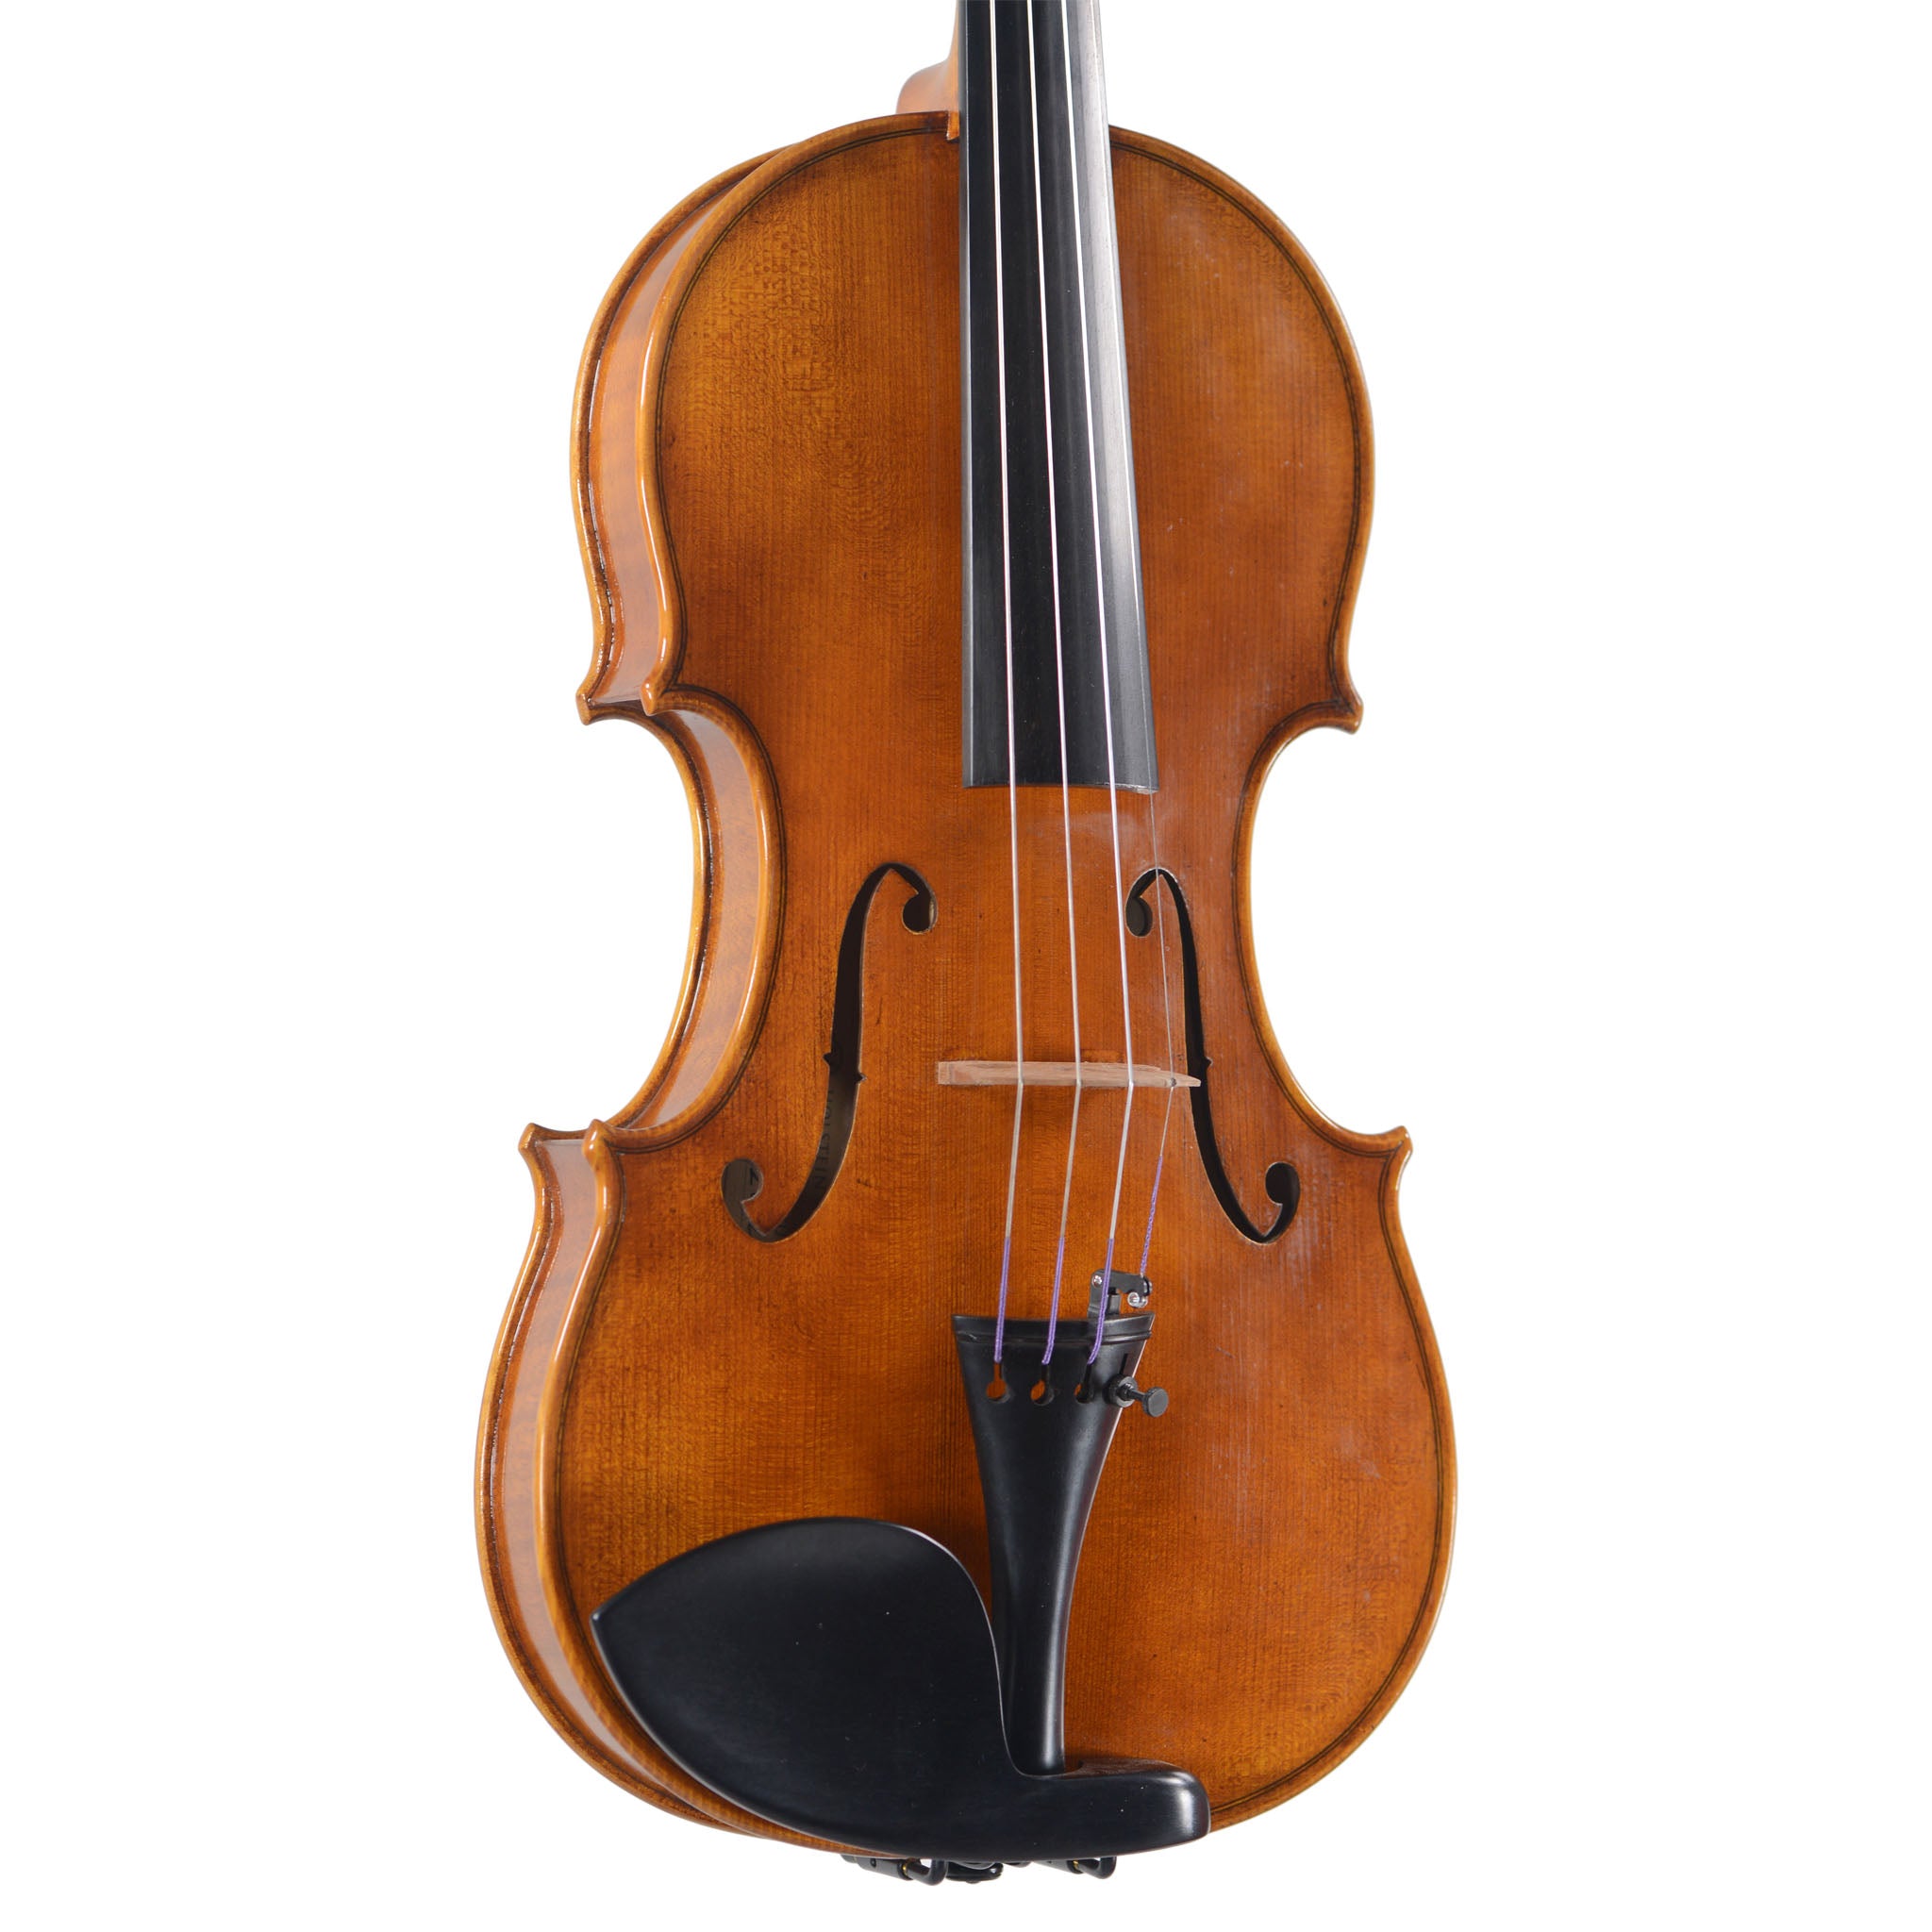 Holstein Bench Cannone 1743 Violin with Antique Finish